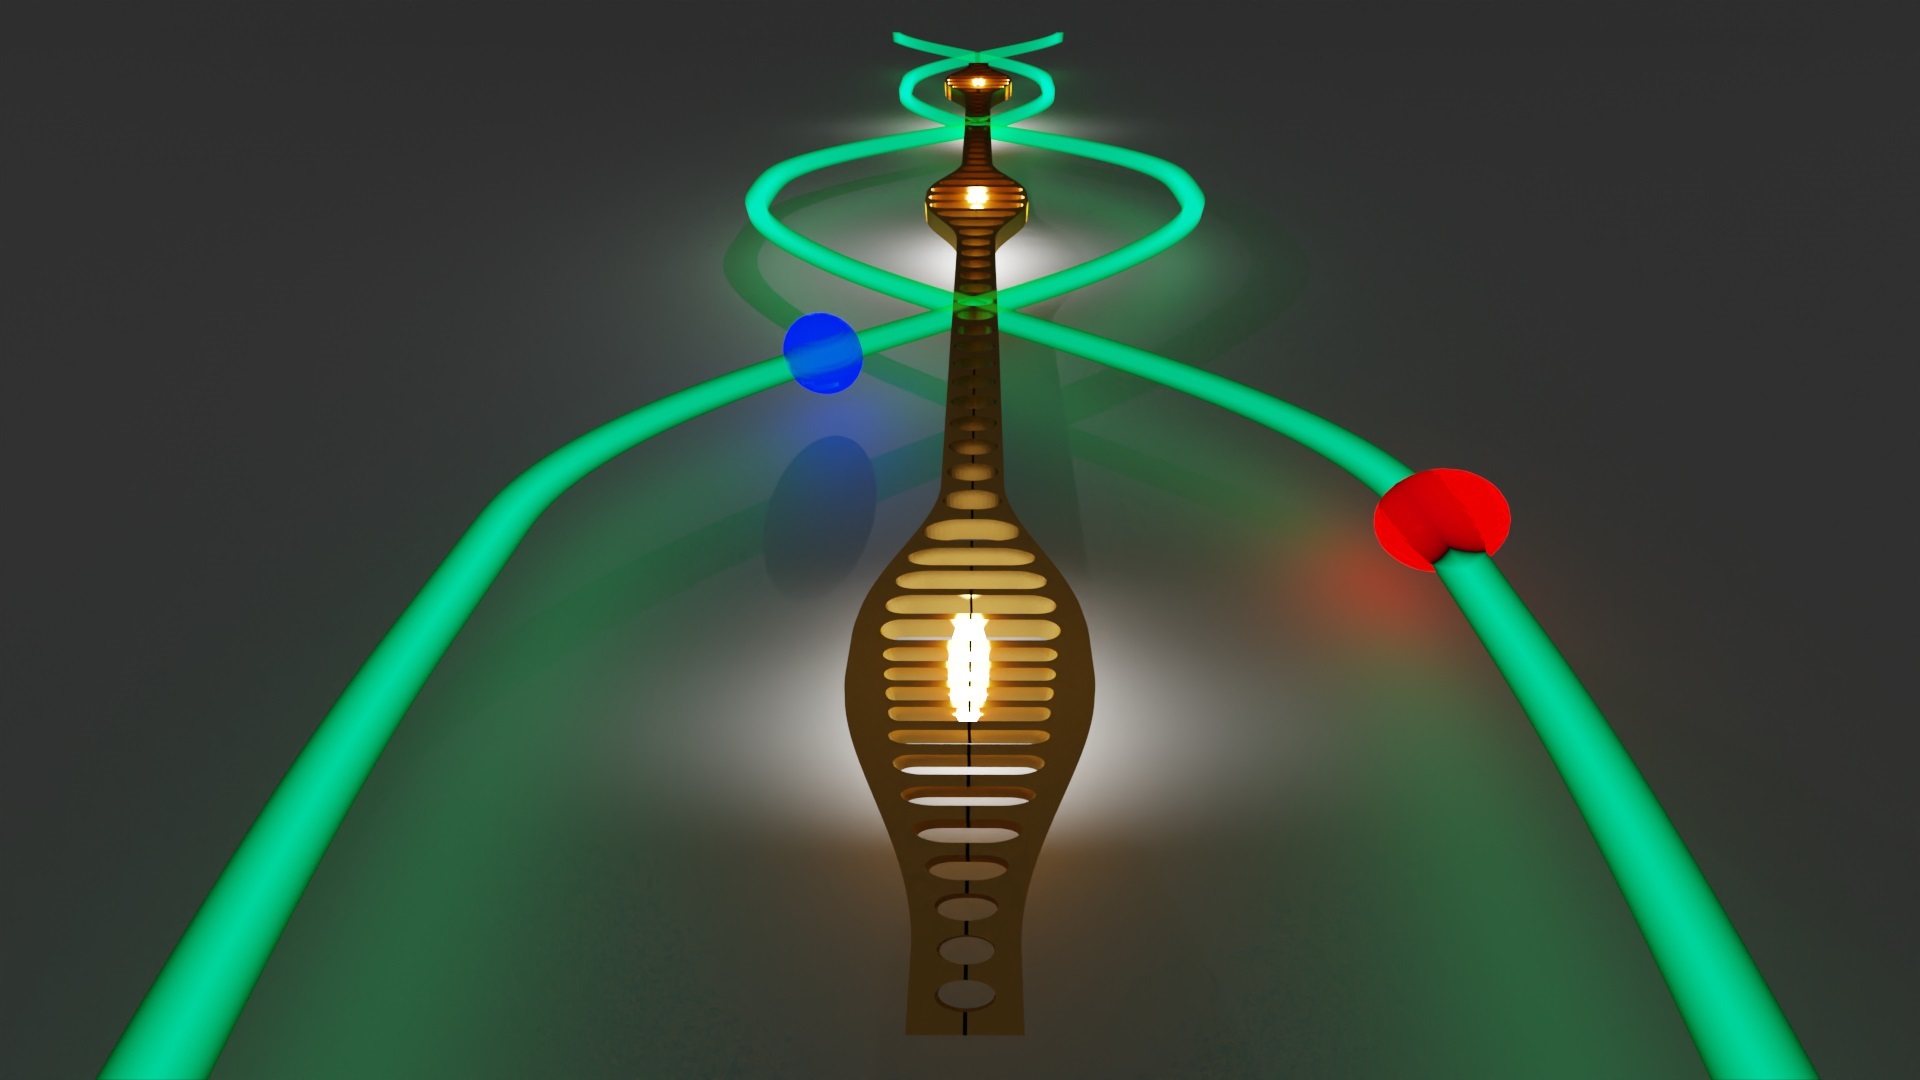 Artist’s impression of entangled phonons – particles of mechanical vibration – traveling along a silicon chip. The blue and red orbs represent light particles that are also entangled with the phonons.